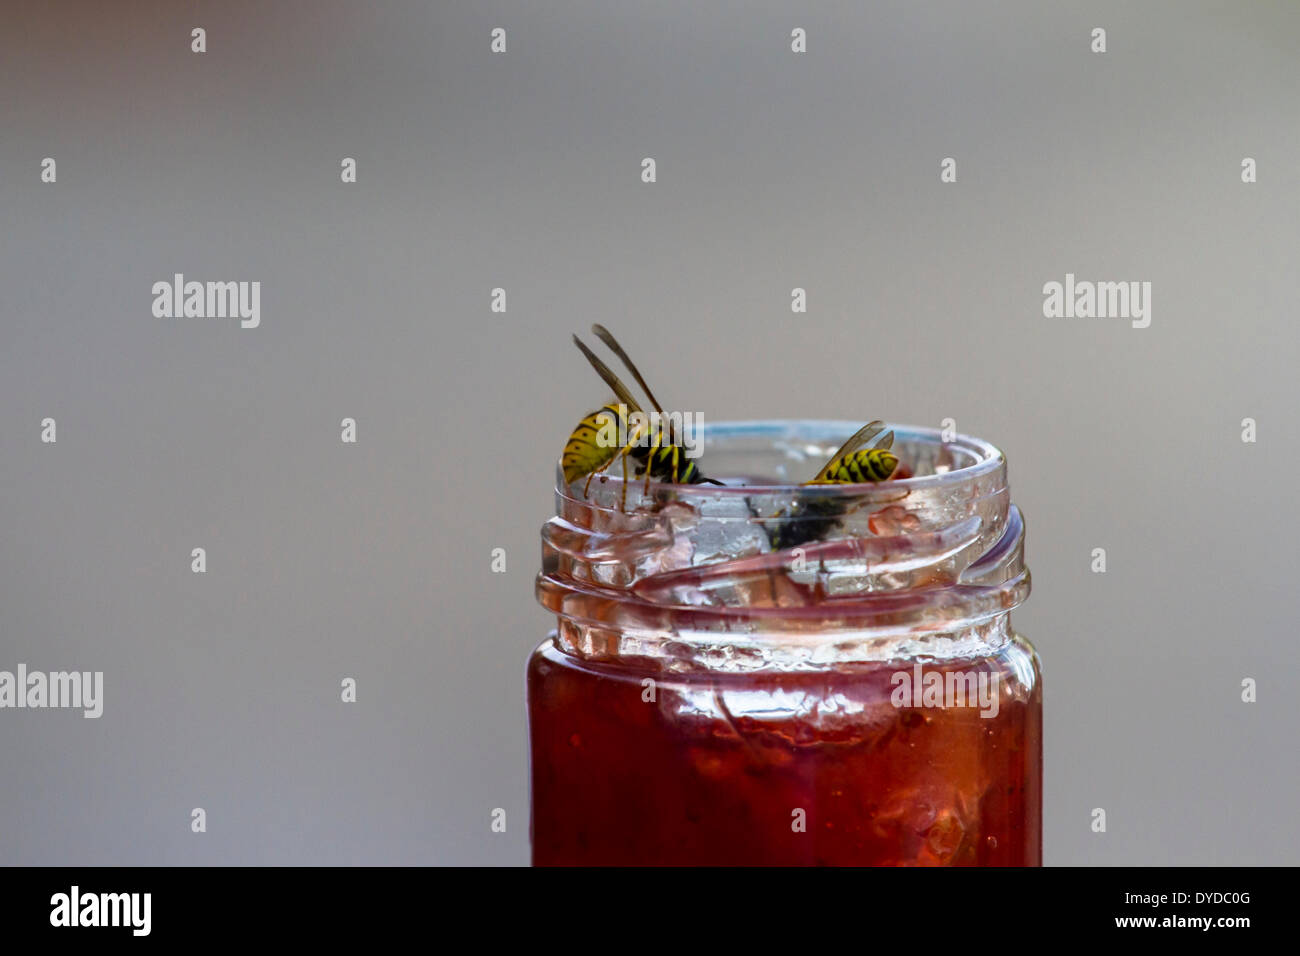 Wasps attracted to a pot of jam. Stock Photo